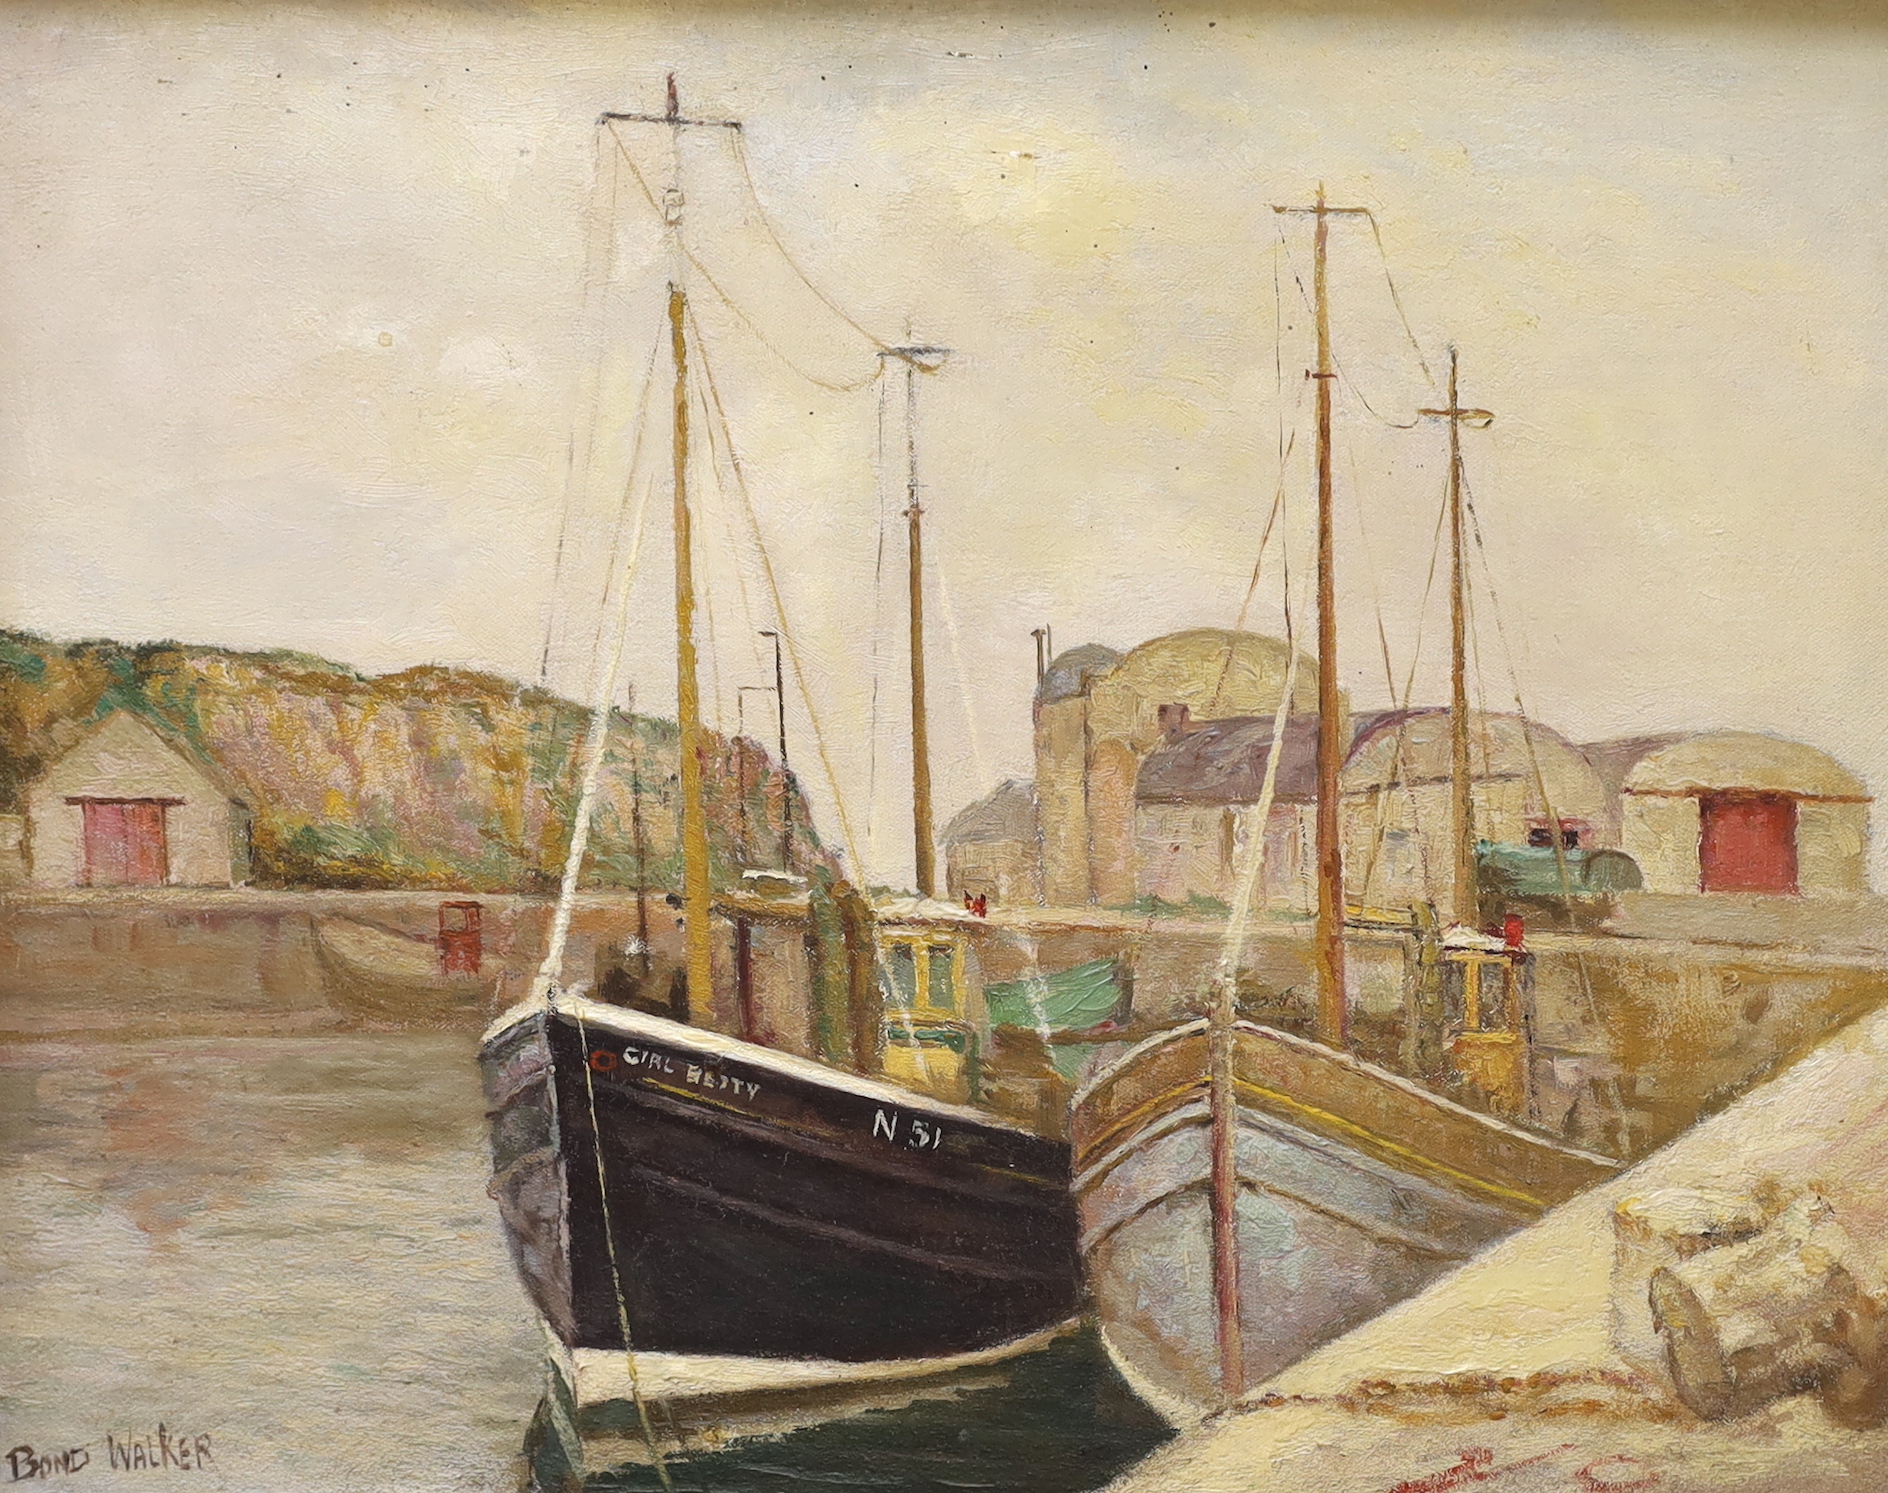 David Bond Walker (1891-1977), oil on canvas, Coastal harbour with moored fishing boats, signed, 40 x 50cm